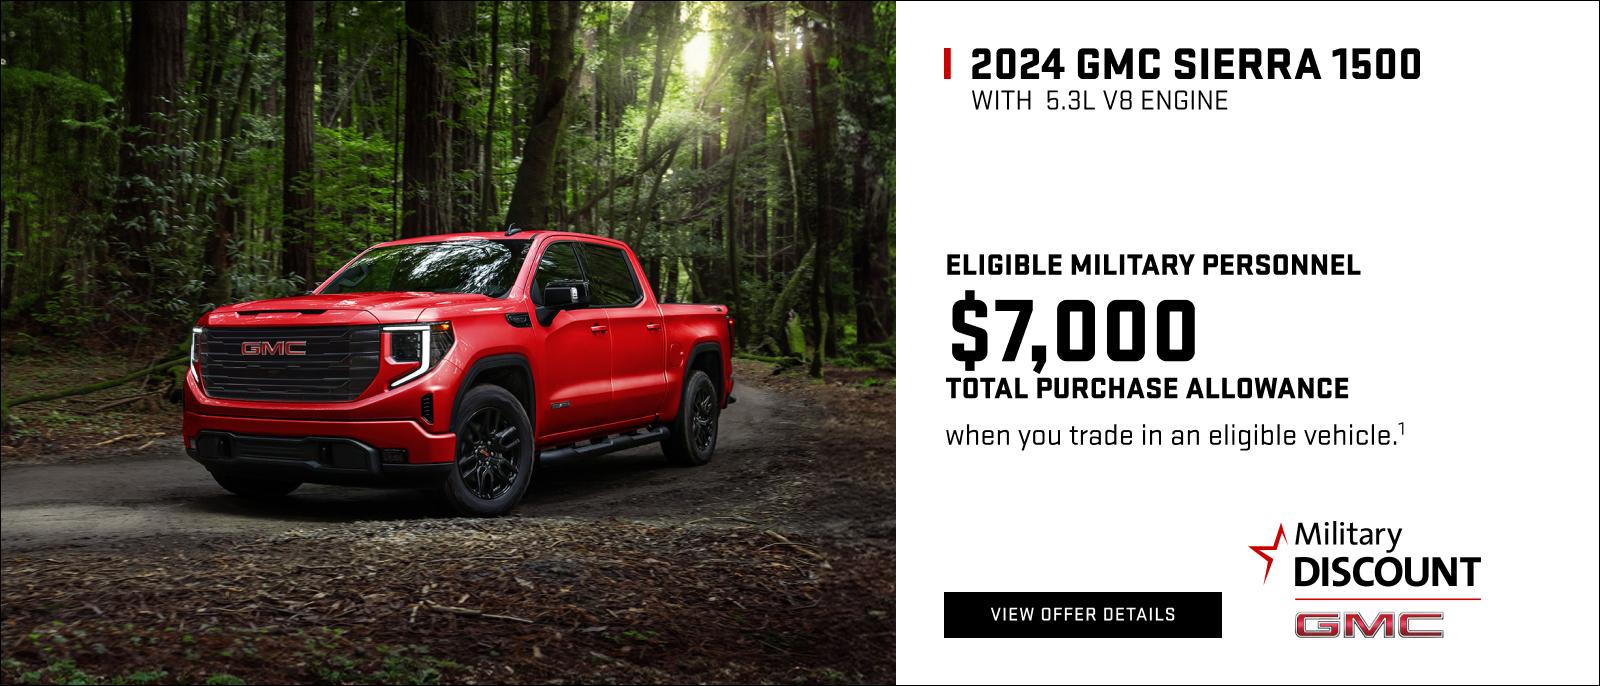 ELIGIBLE MILITARY PERSONNEL

$7,000 TOTAL PURCHASE ALLOWANCE when you trade in an eligible vehicle.1